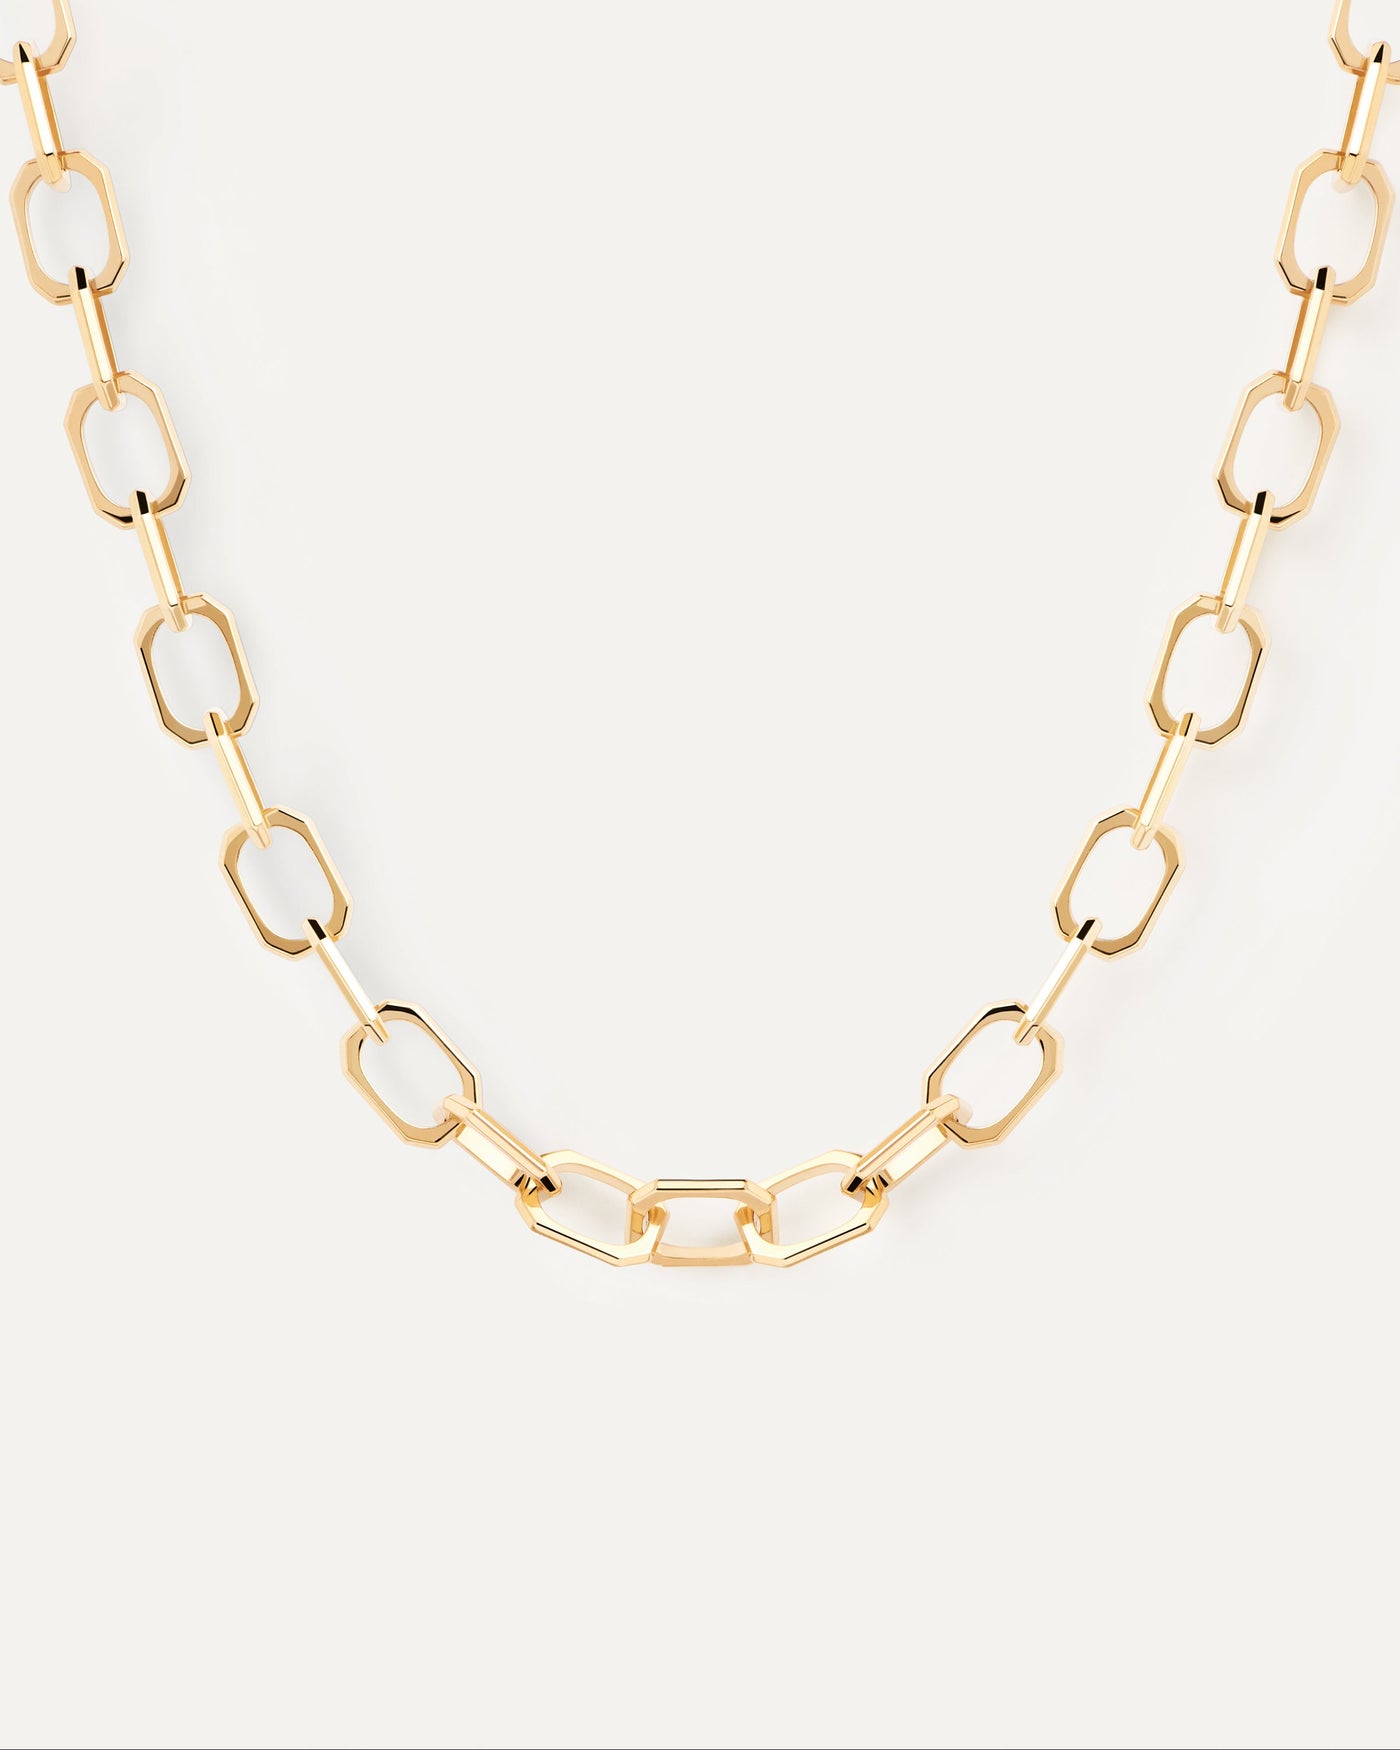 2024 Selection | Small Signature Chain Necklace. Cable chain necklace with octogonal links in 18K gold plating. Get the latest arrival from PDPAOLA. Place your order safely and get this Best Seller. Free Shipping.